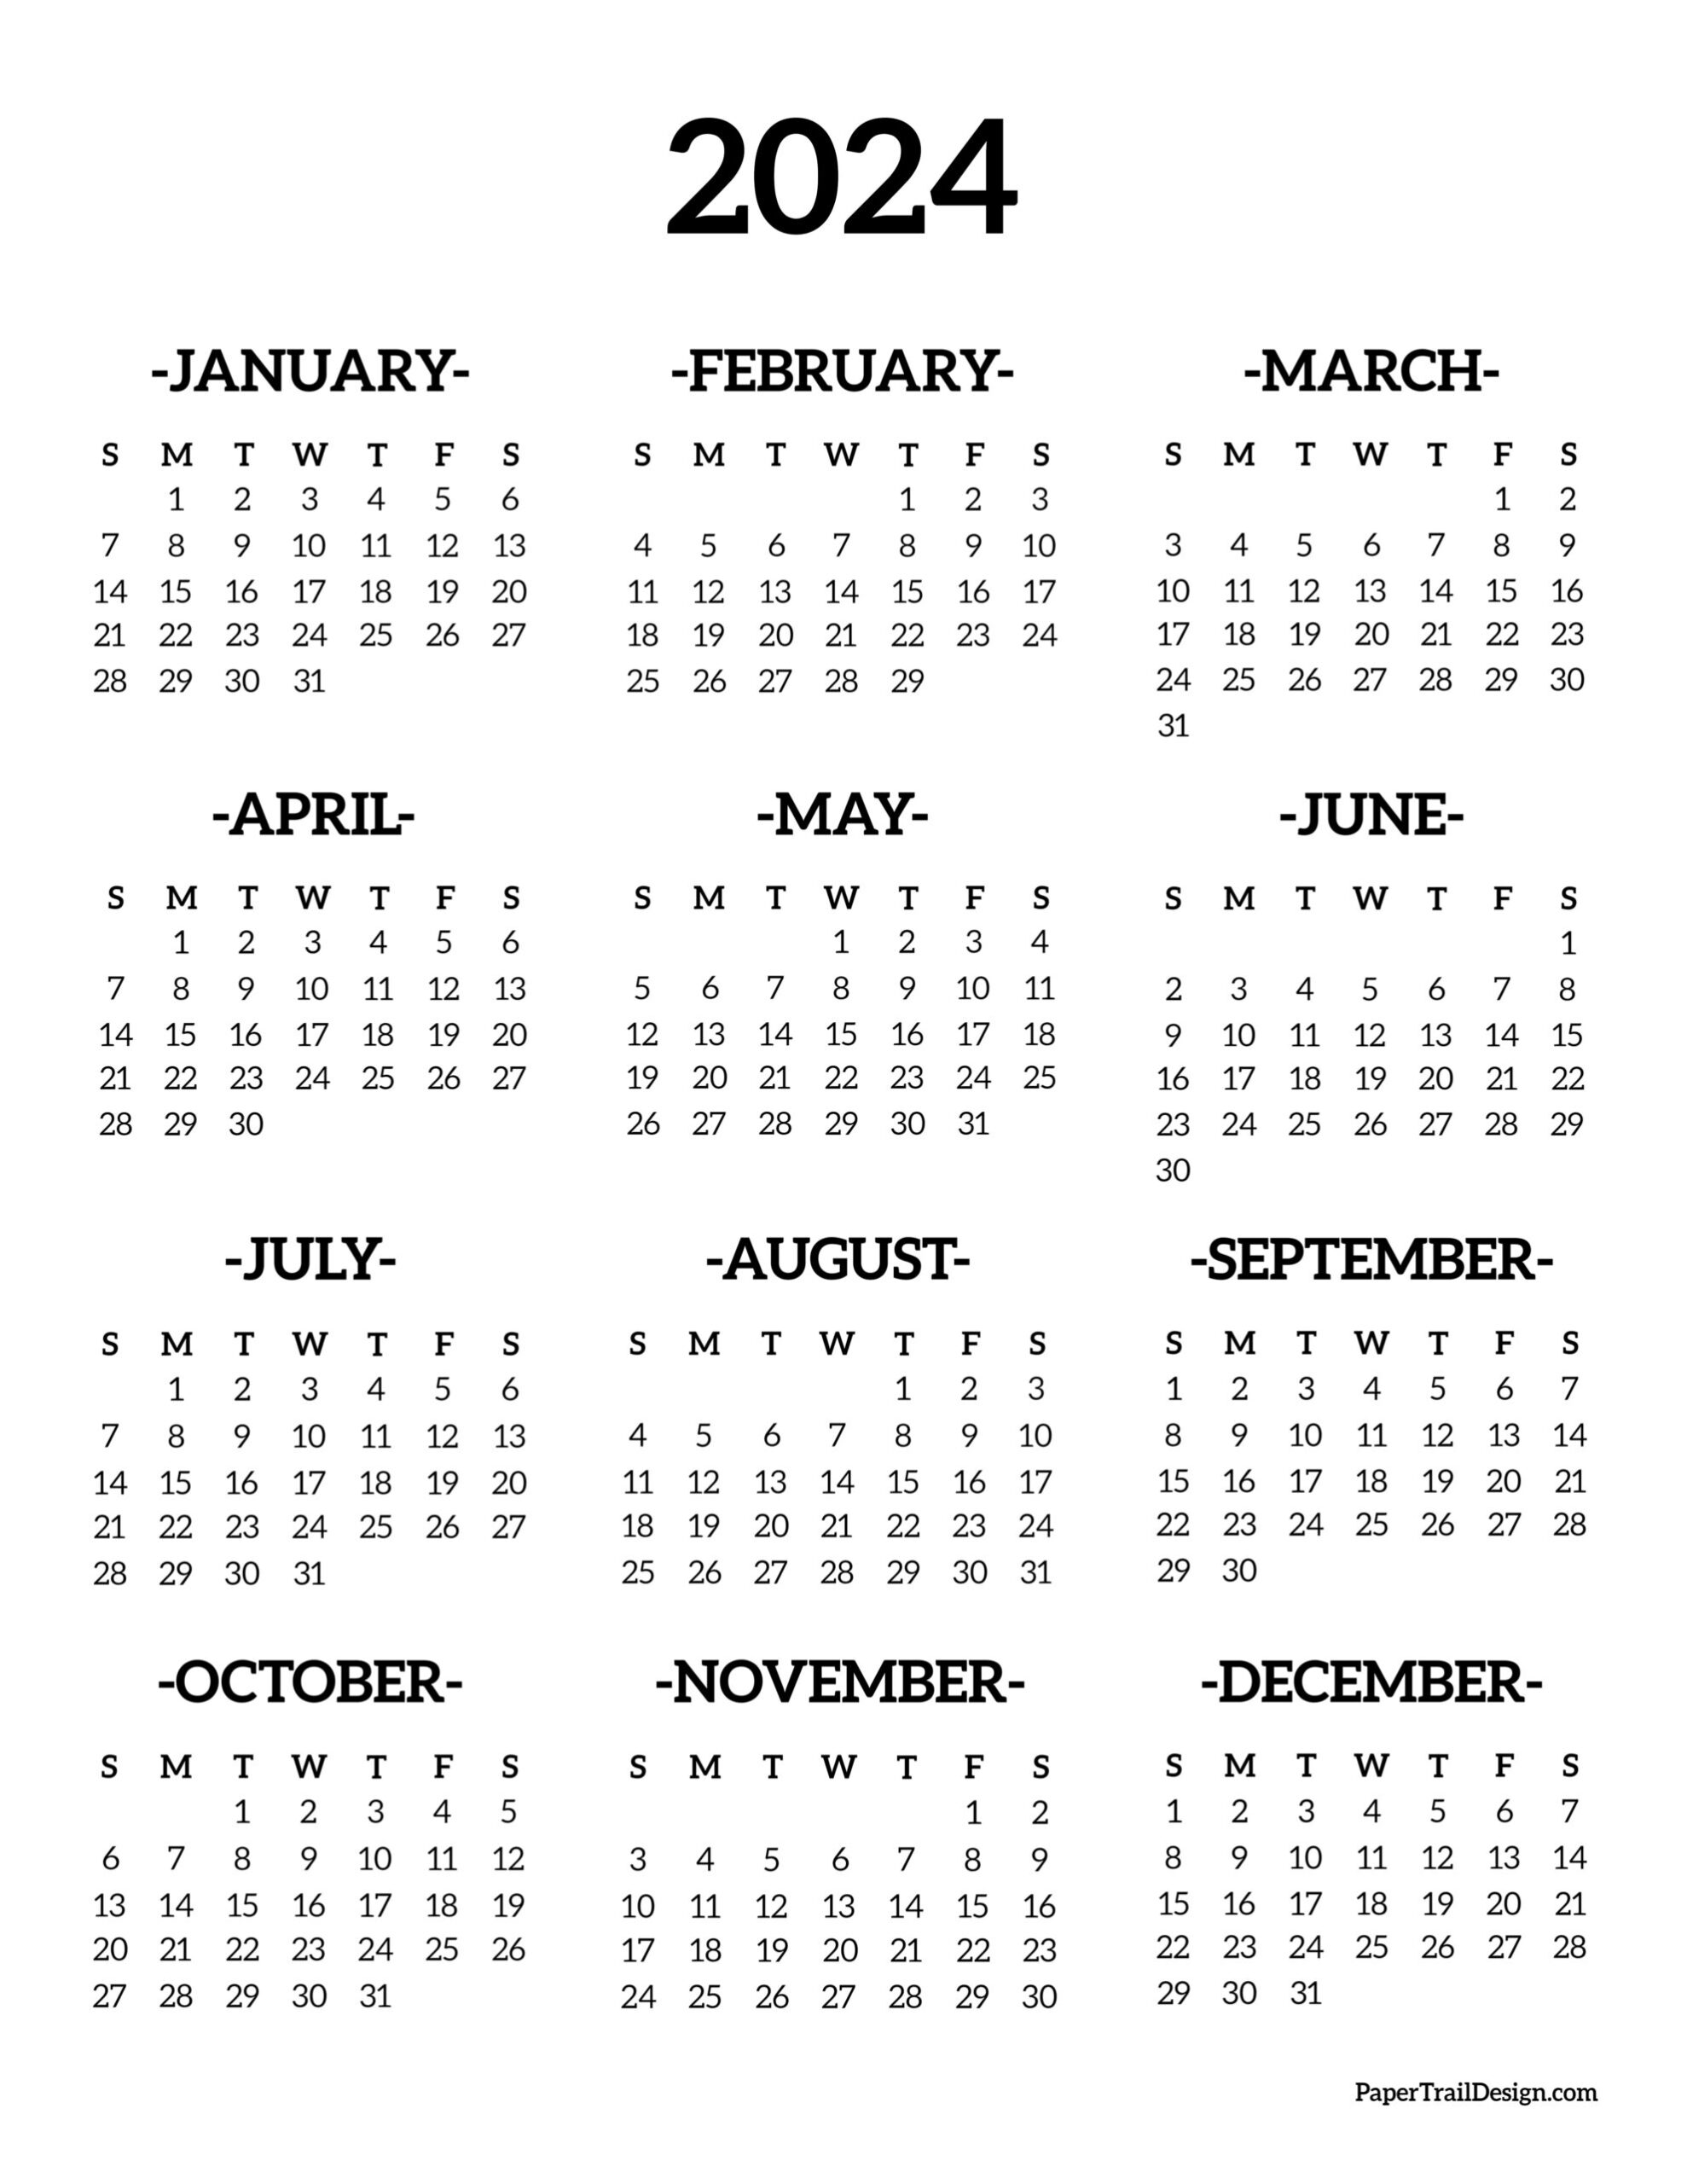 Calendar 2024 Printable One Page - Paper Trail Design for 2024 Printable Calendar Yearly